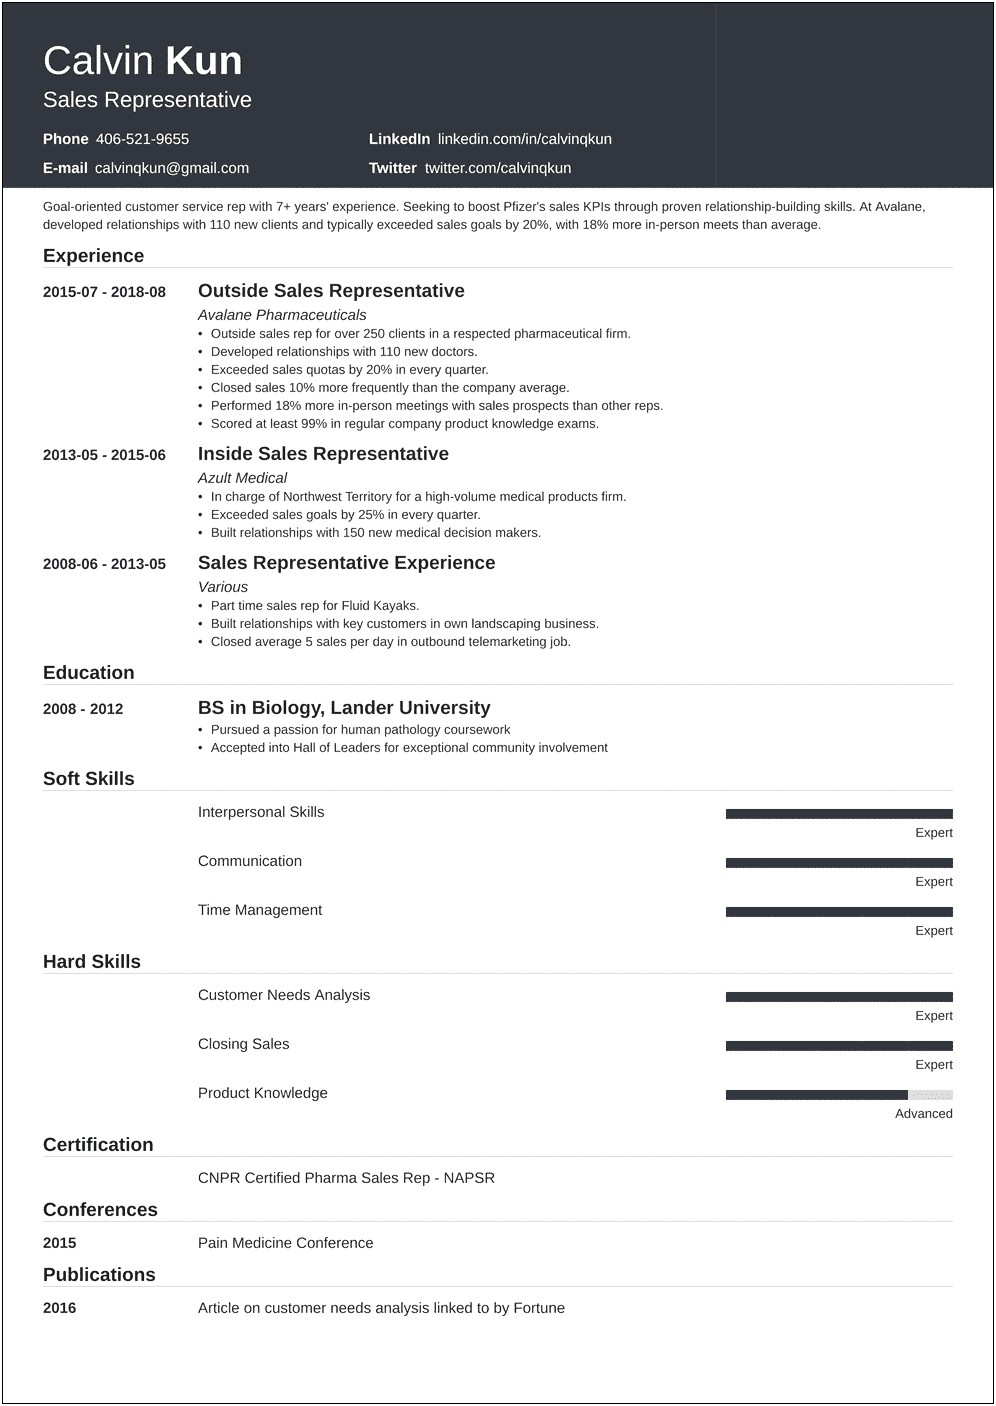 Resume Experience Examples For Sales